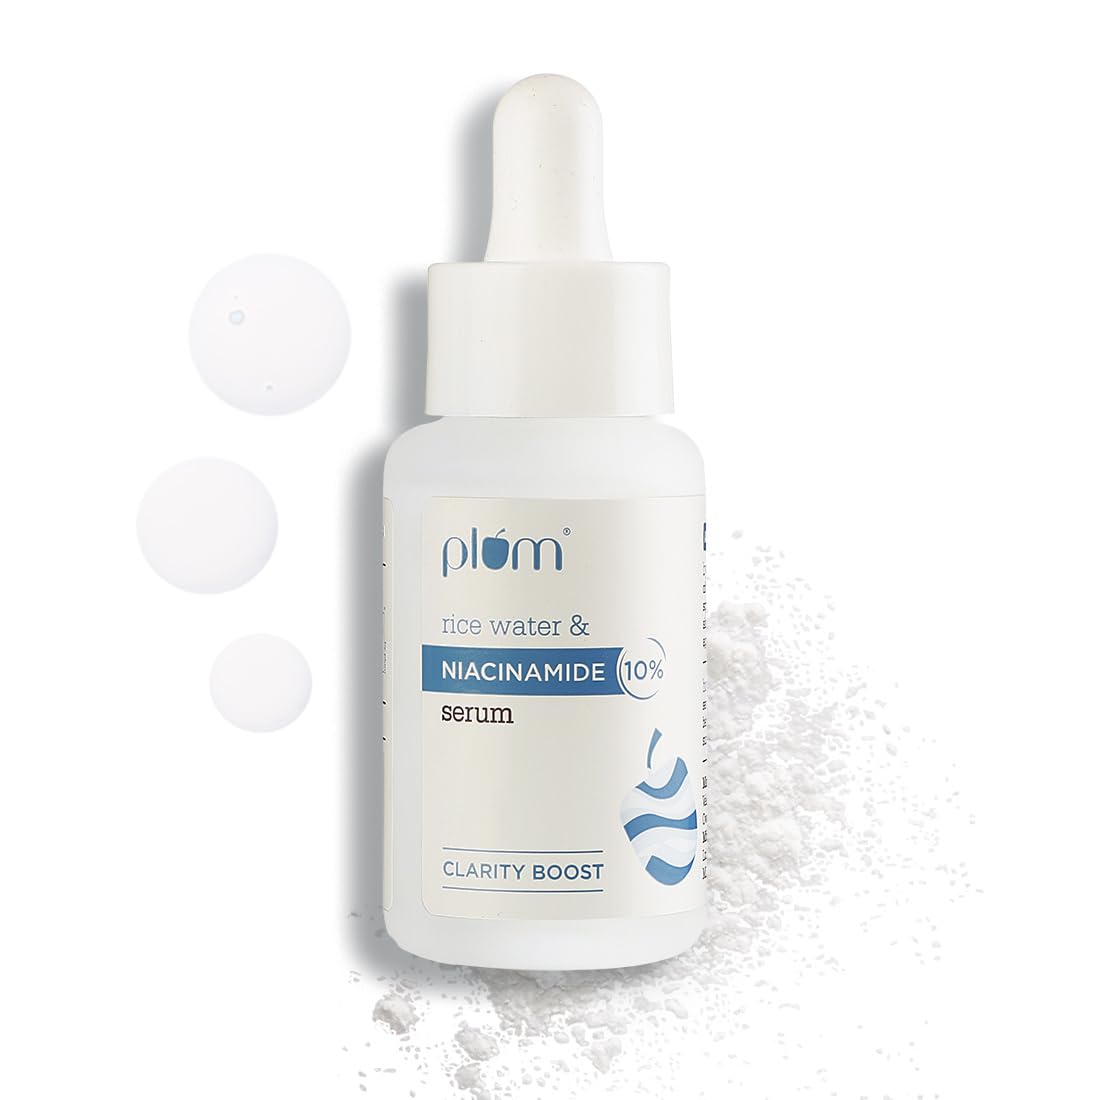 Plum 10% Niacinamide Face Serum with Rice Water